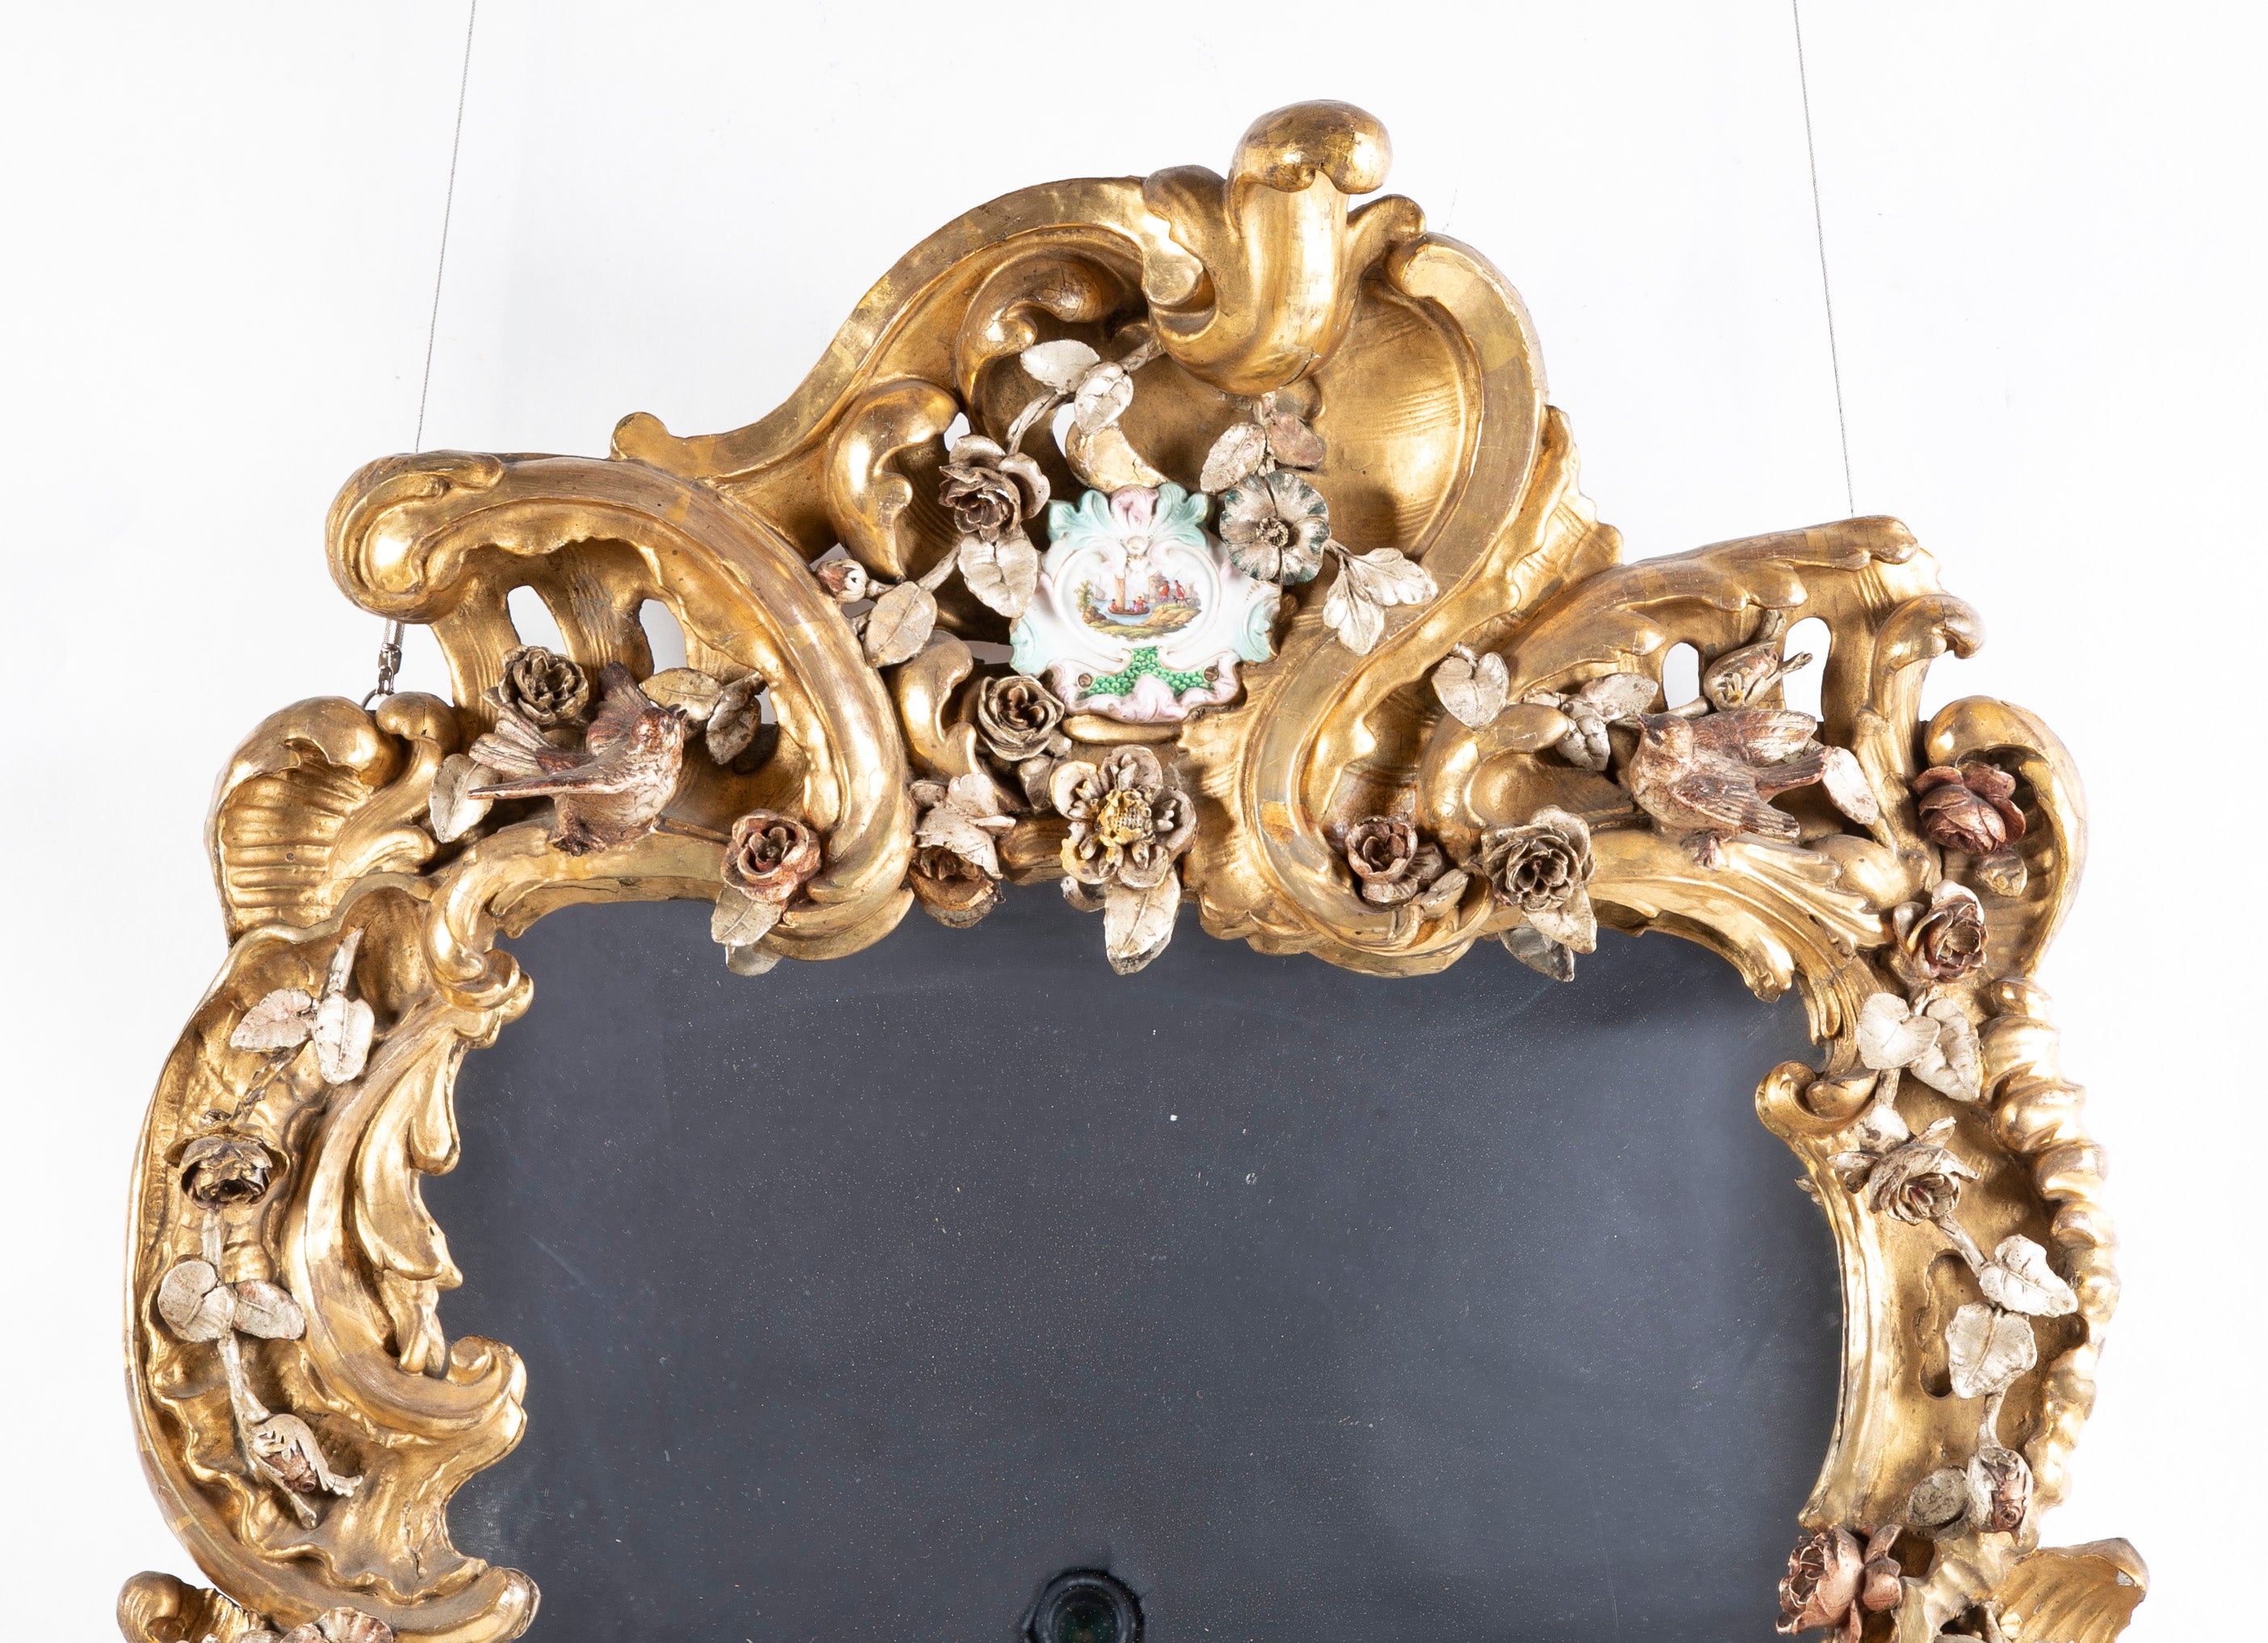 Rare Rococo German Giltwood Carved Mirror with Porcelain Medallions Insets